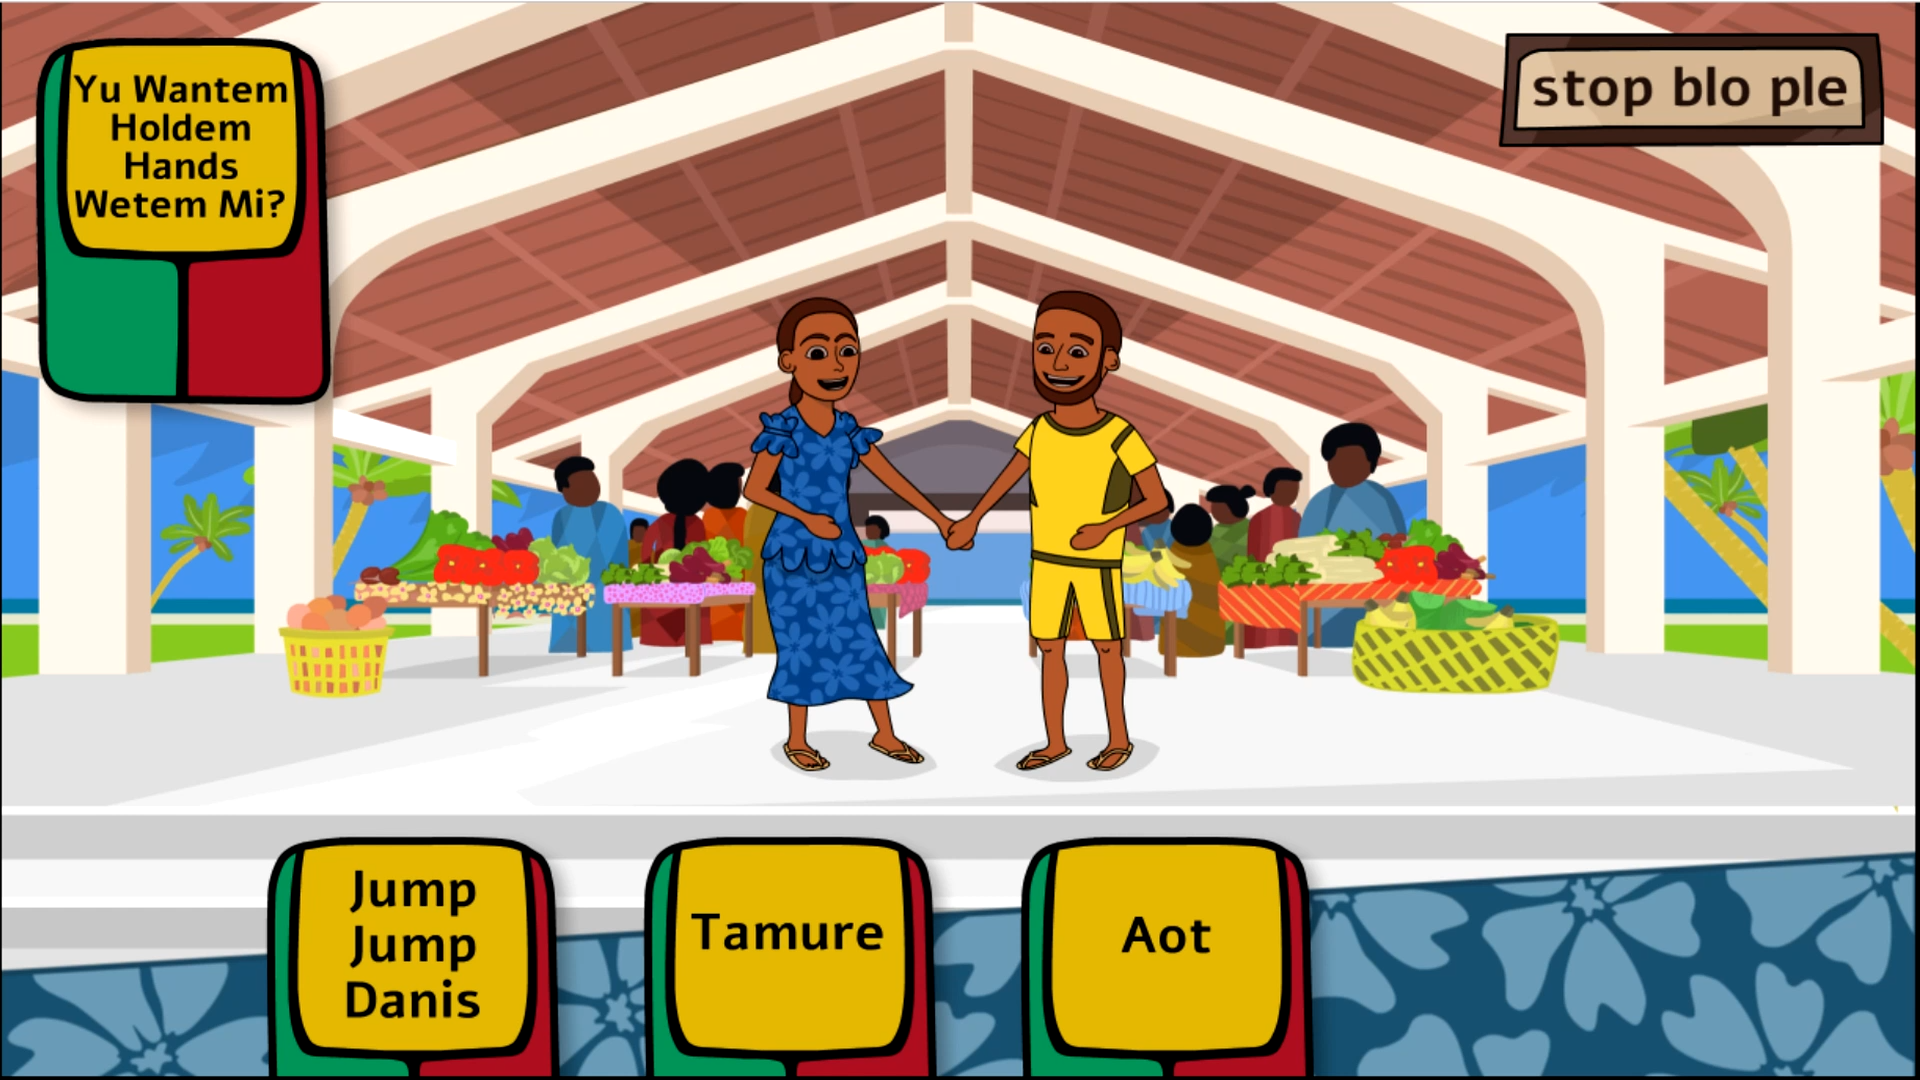 Screenshot from Rispek Danis (The Respect Dance) a serious video game about consent. Two game characters are holding hands in a marketplace in Vanuatu.